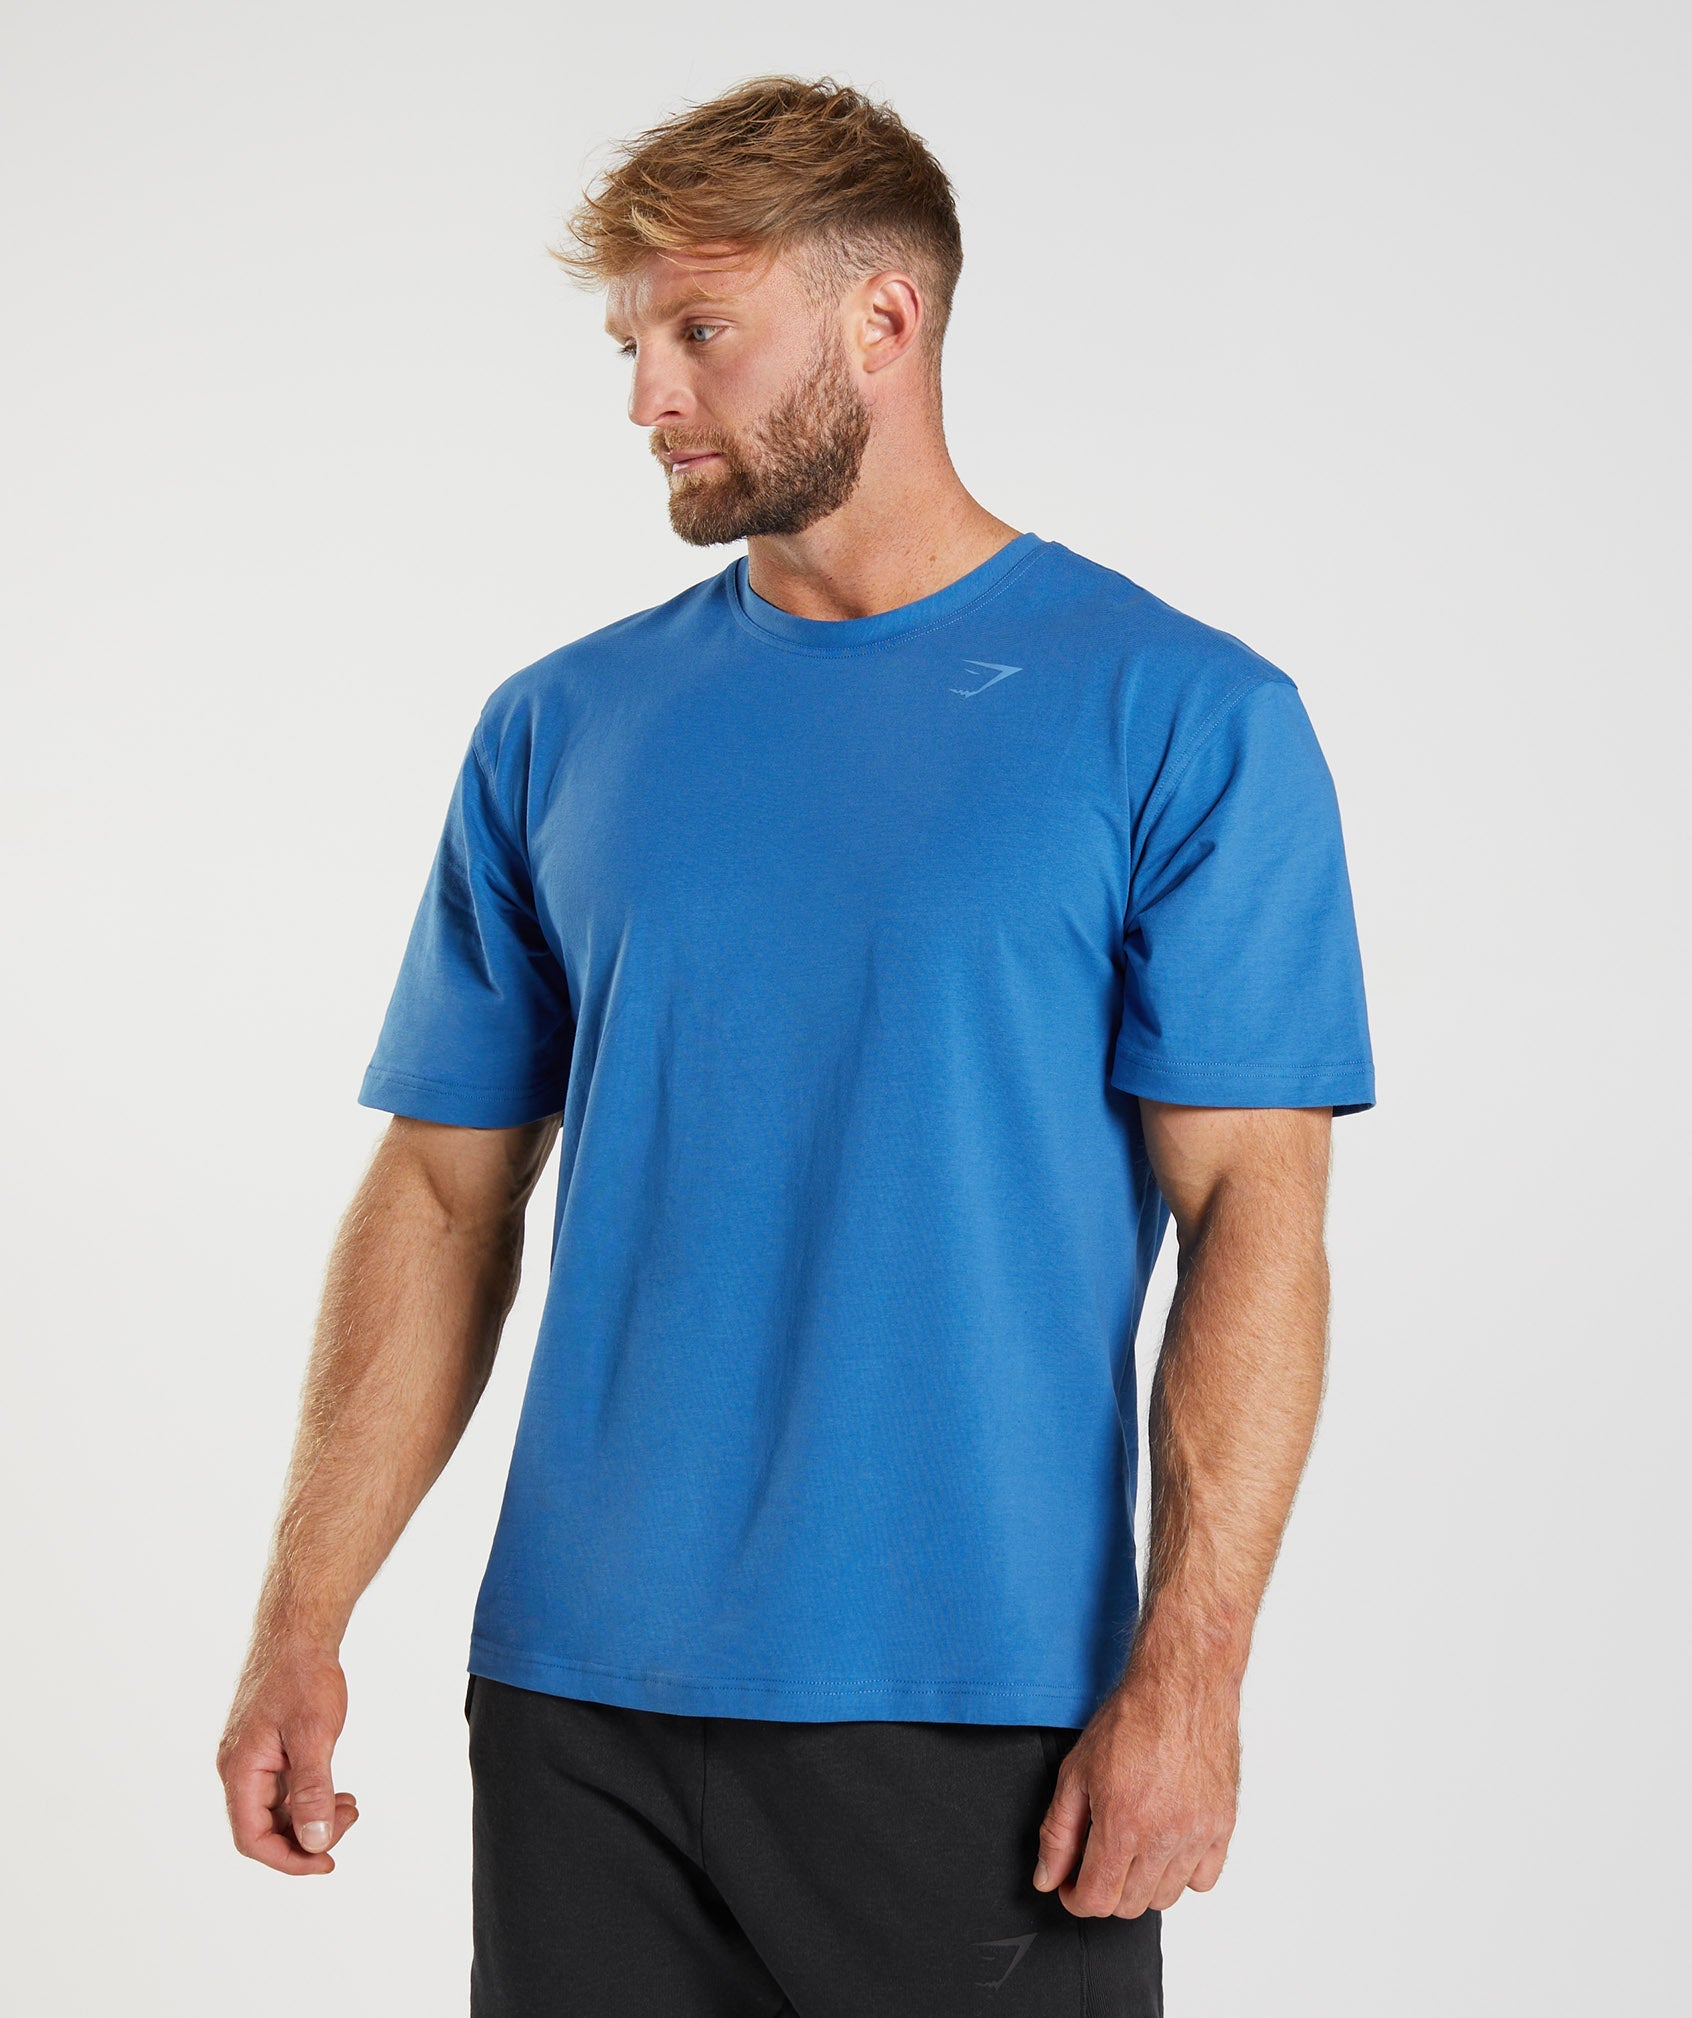 Power T-Shirt in Lakeside Blue